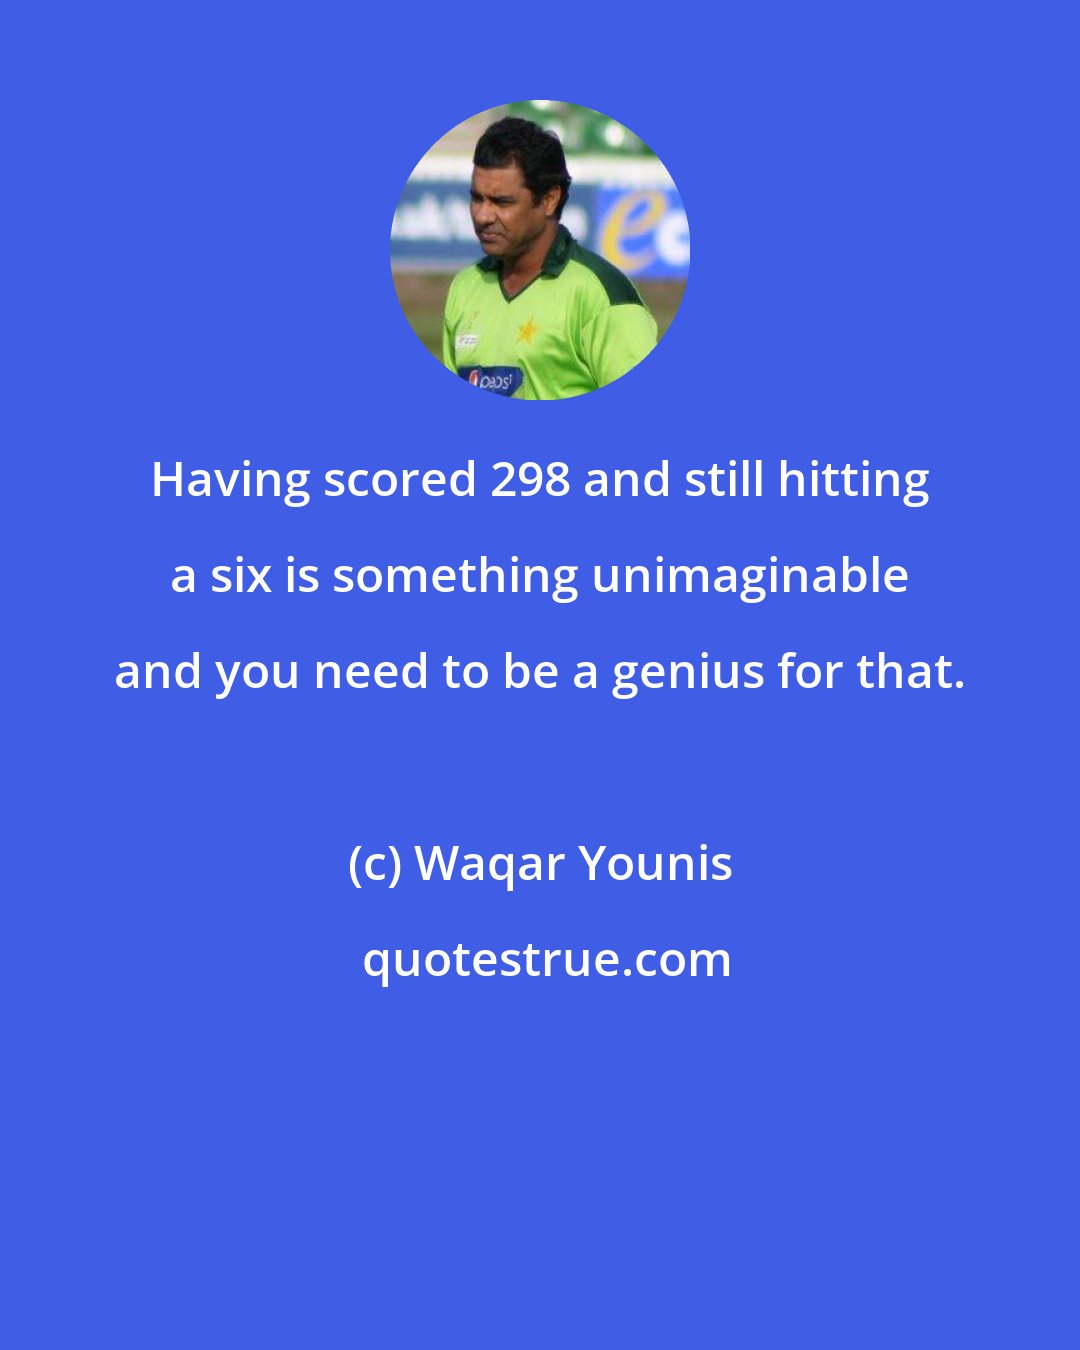 Waqar Younis: Having scored 298 and still hitting a six is something unimaginable and you need to be a genius for that.